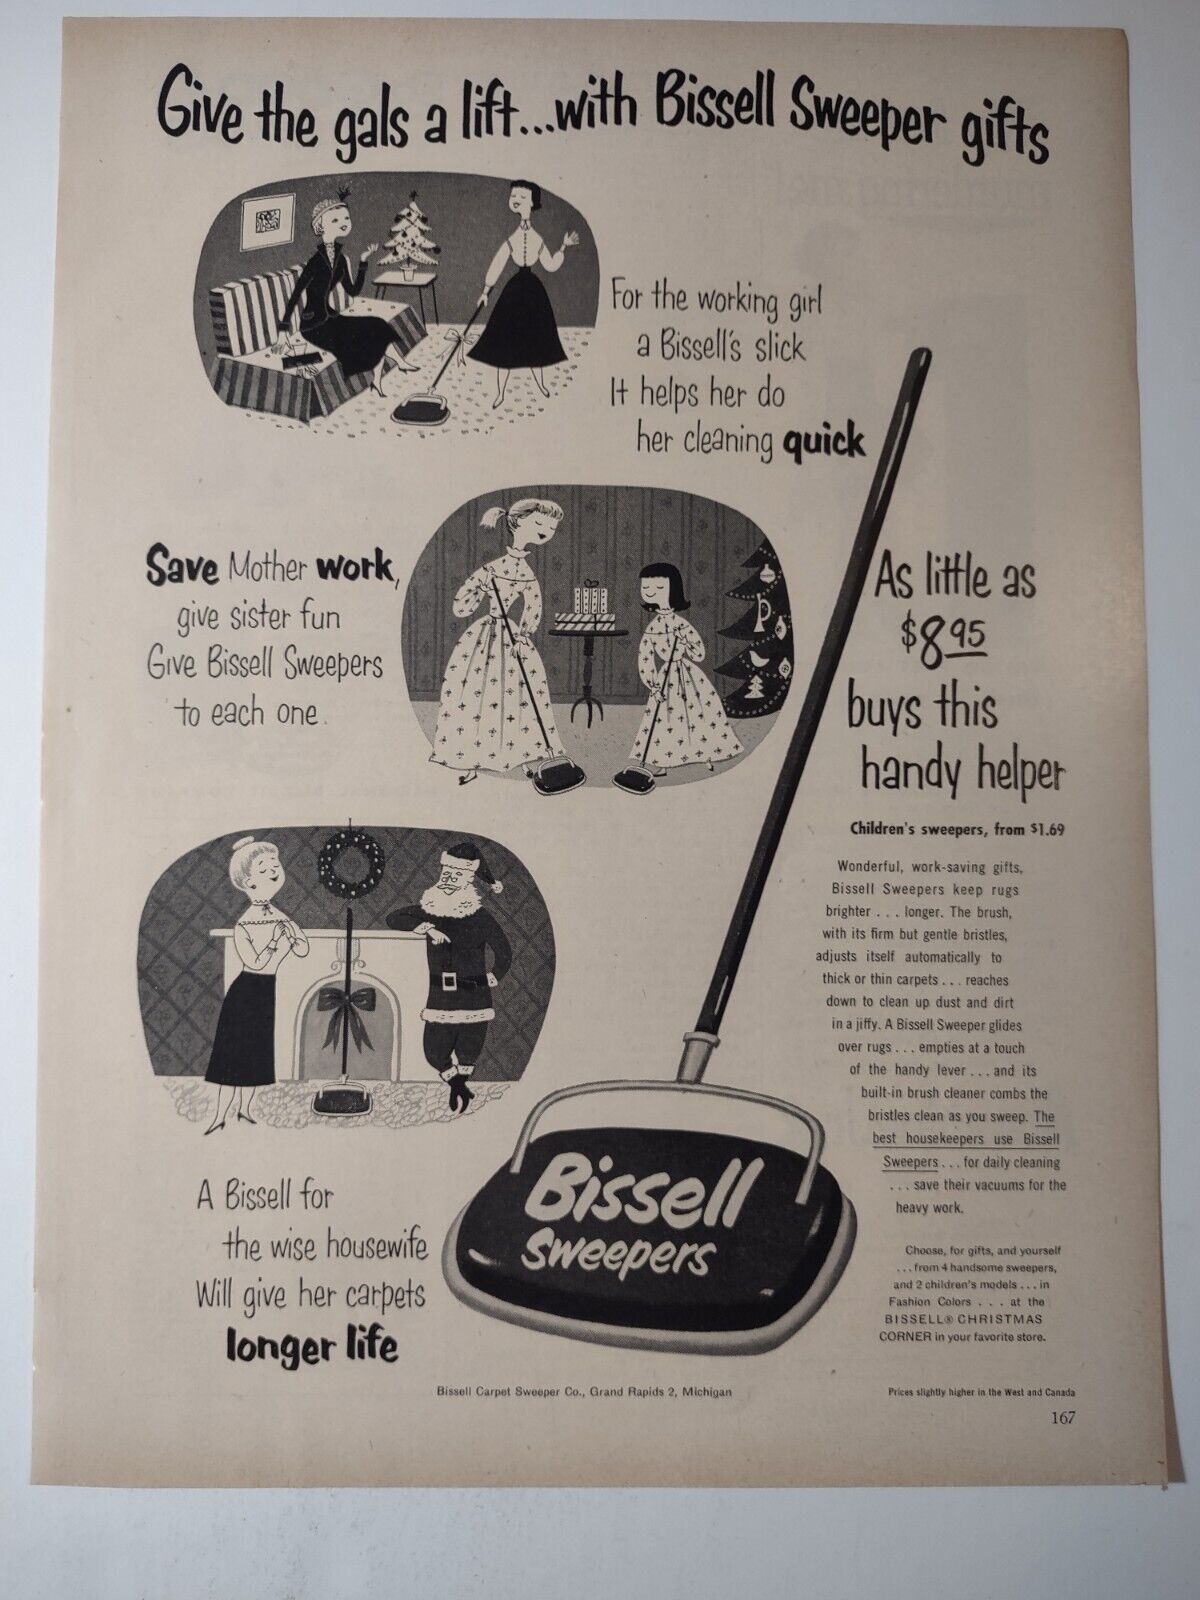 Bissell Sweepers Give the Gals a Lift with Gifts Vintage 1950s Print Ad